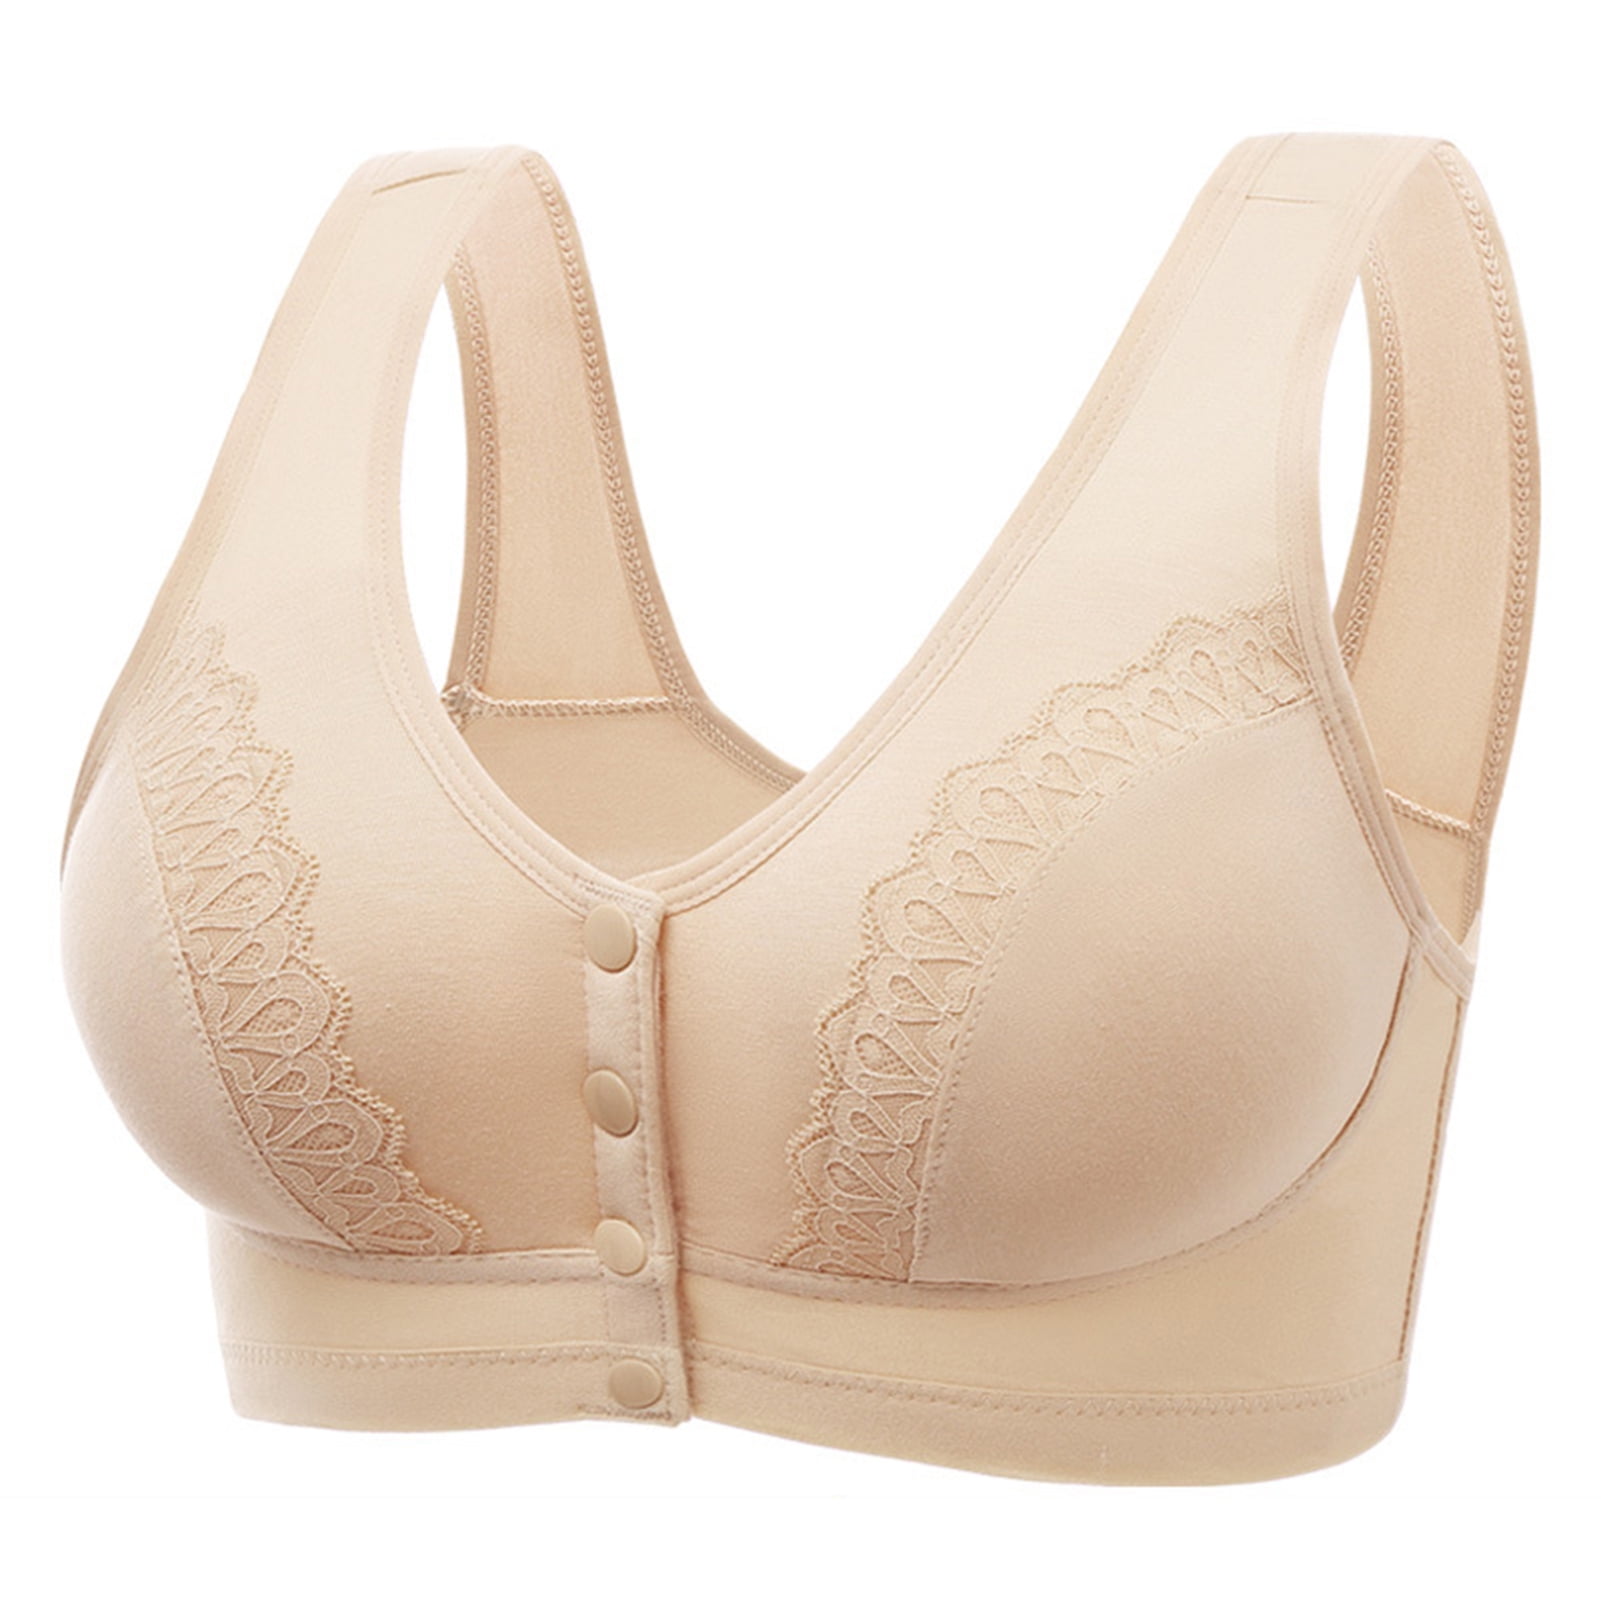 Shop No Ring Front Button Bra with great discounts and prices